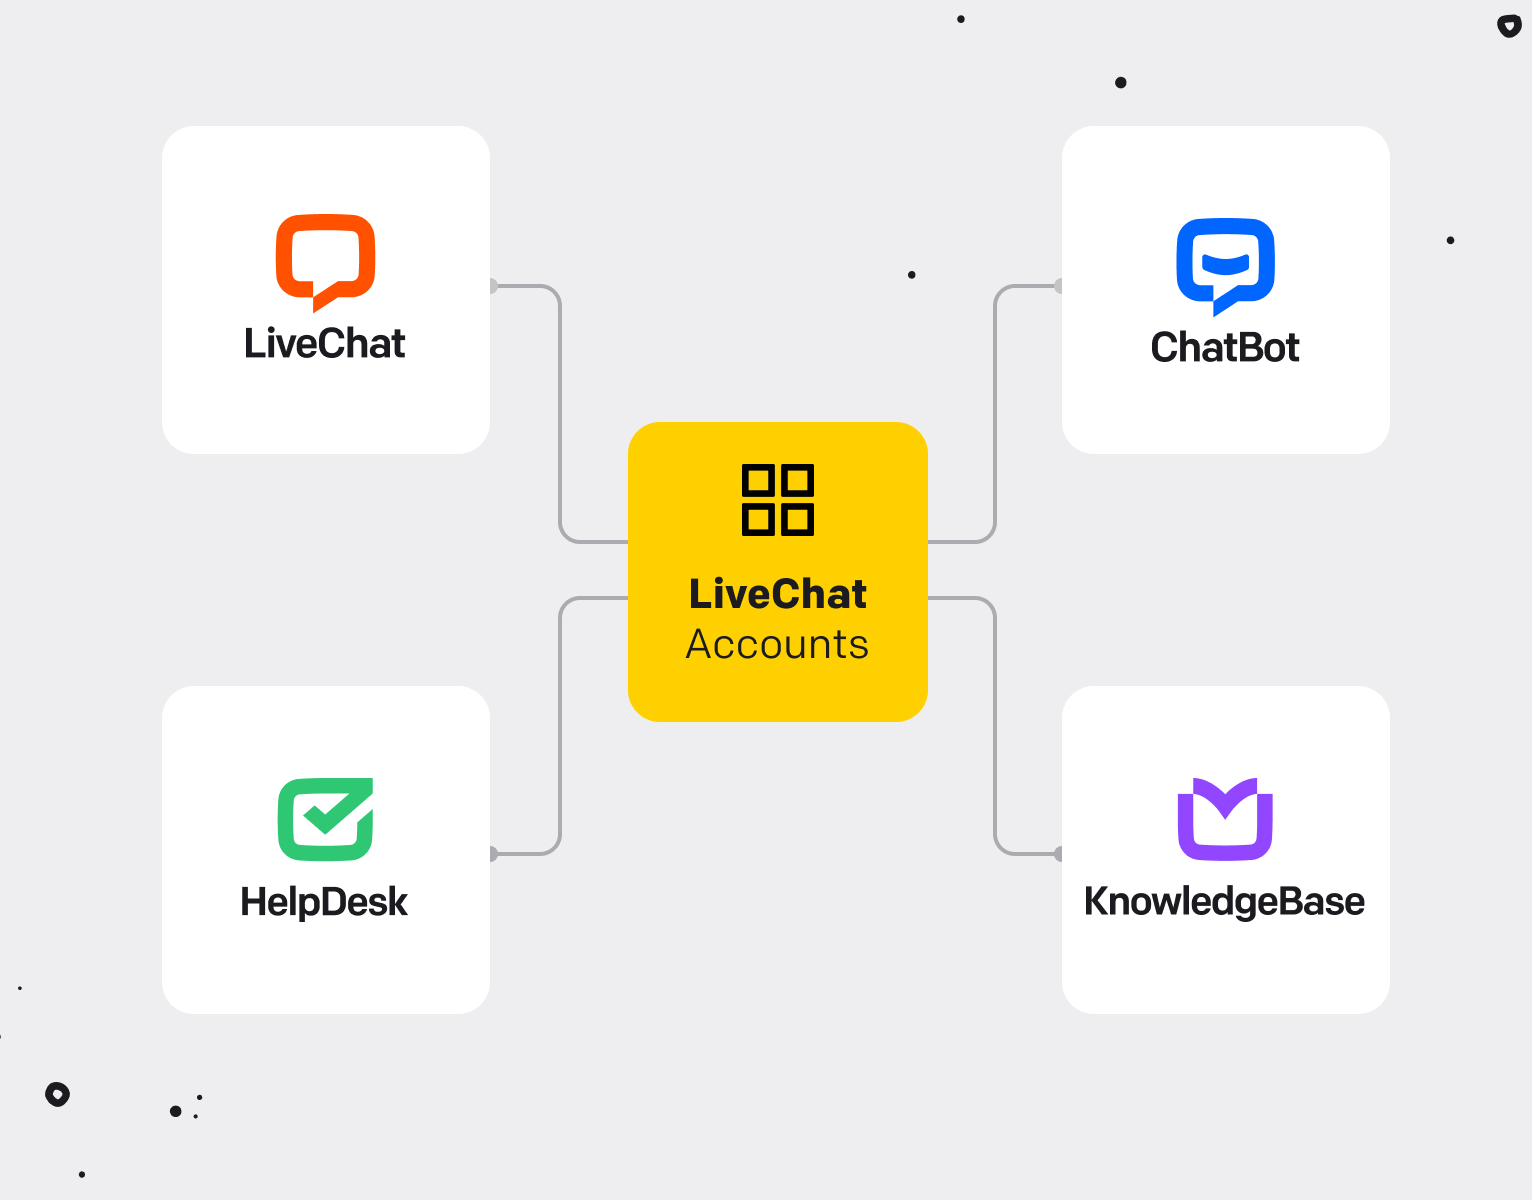 Explanation on how LiveChat Accounts space works.